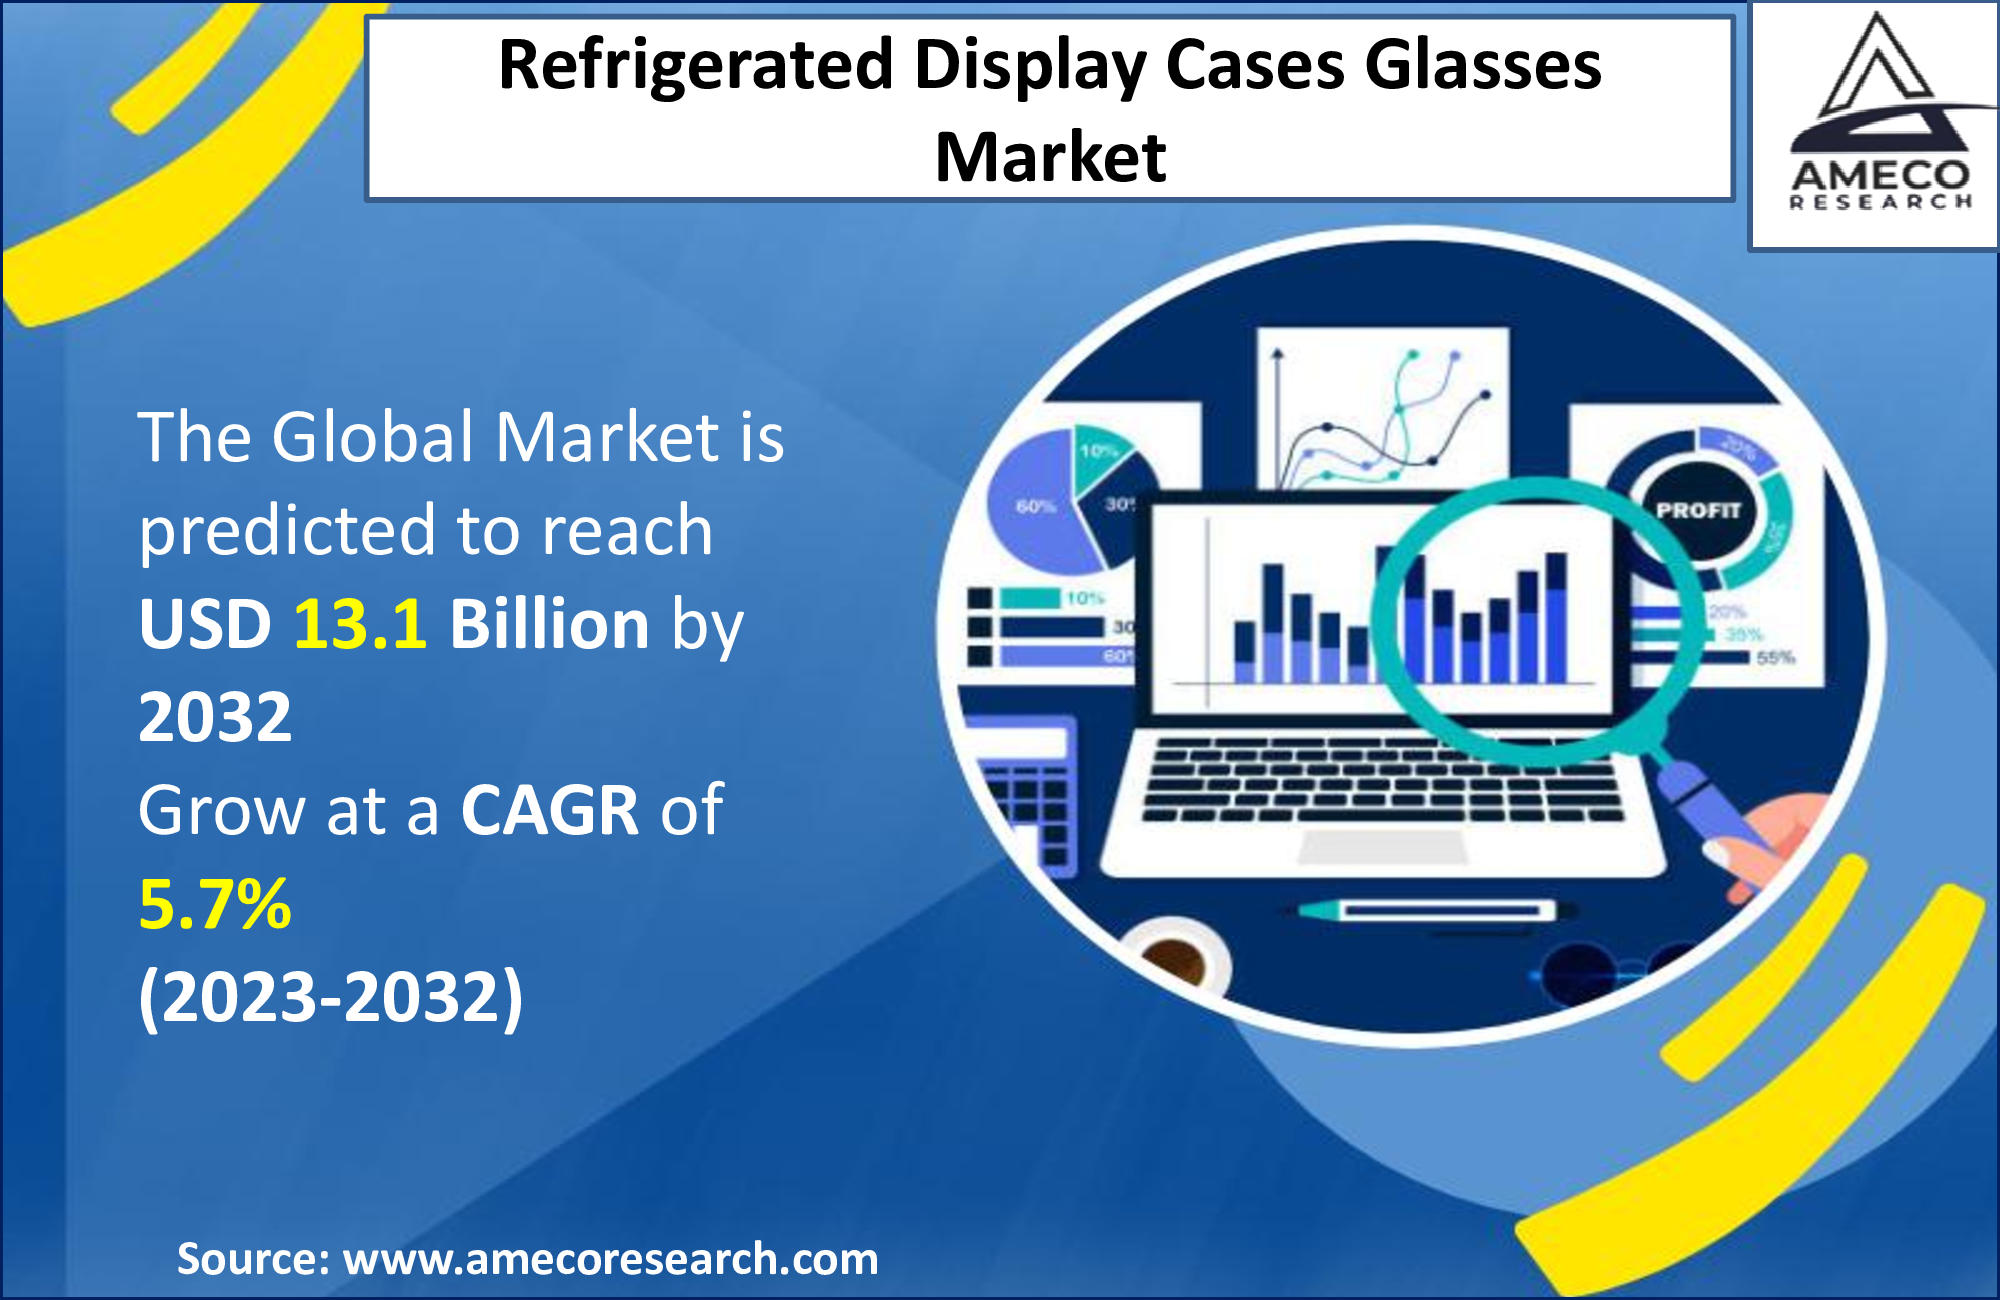 Refrigerated Display Cases Glasses Market